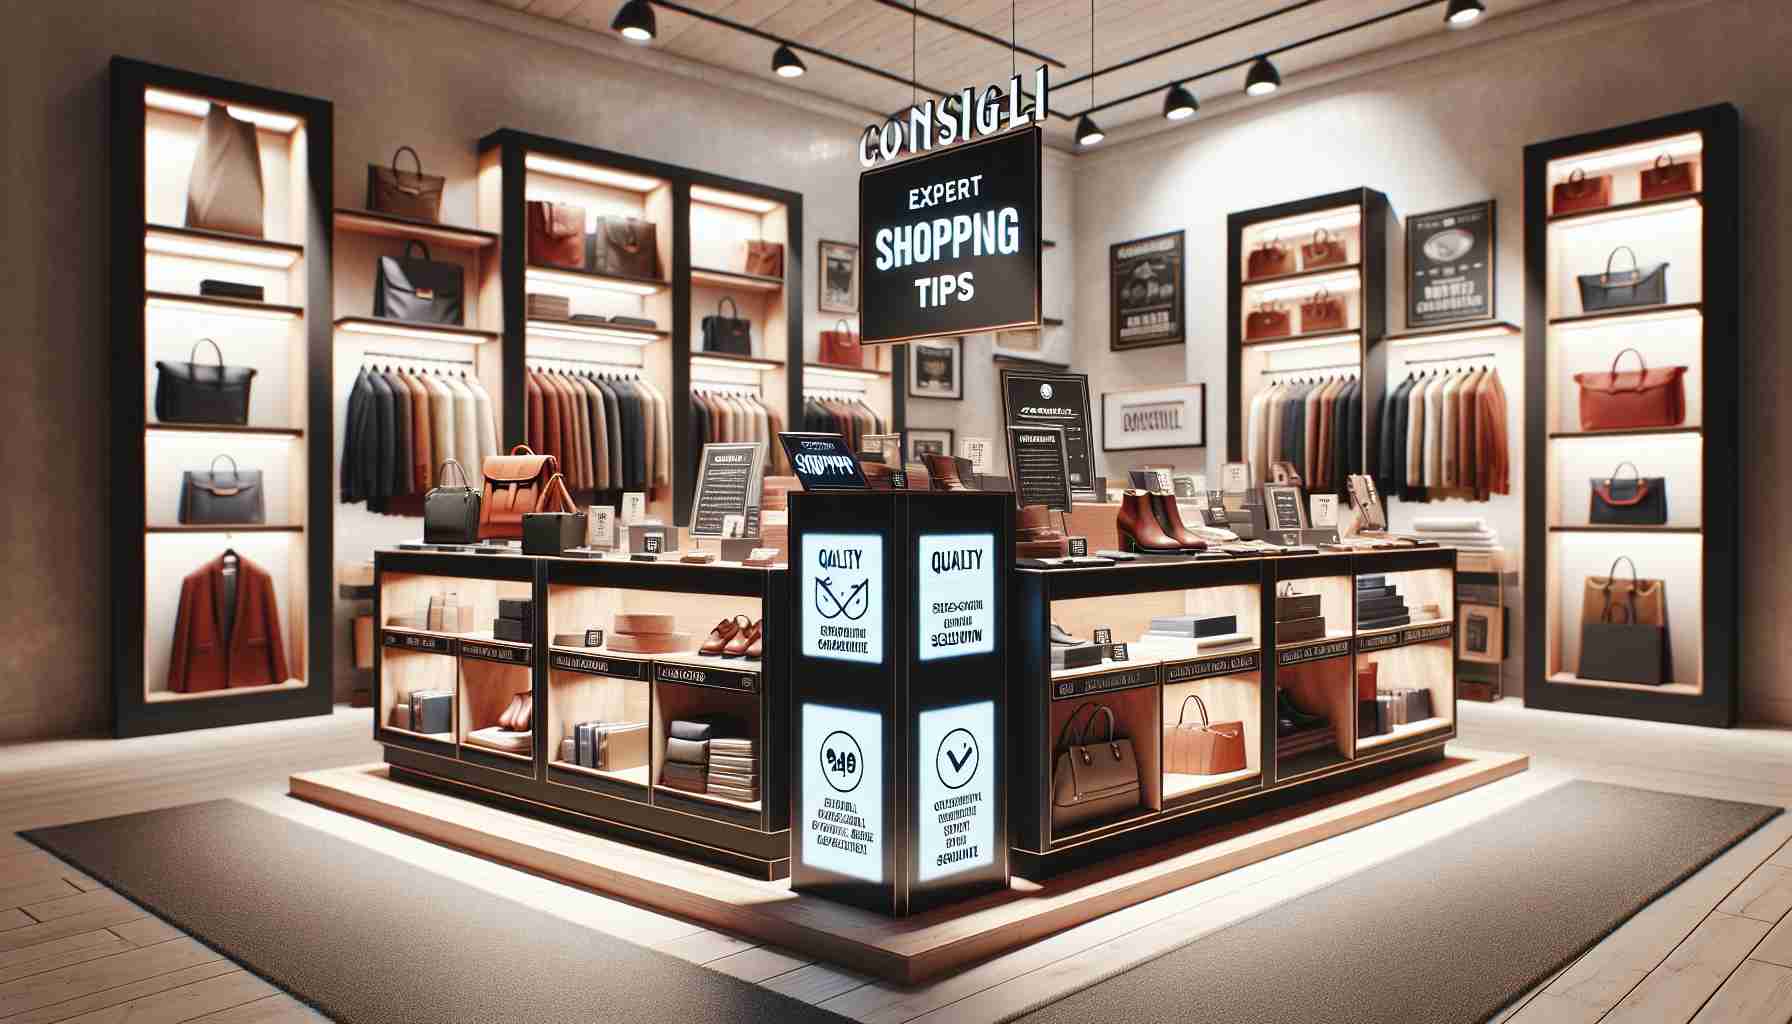 Explore Expert Shopping Tips with Consigli.it